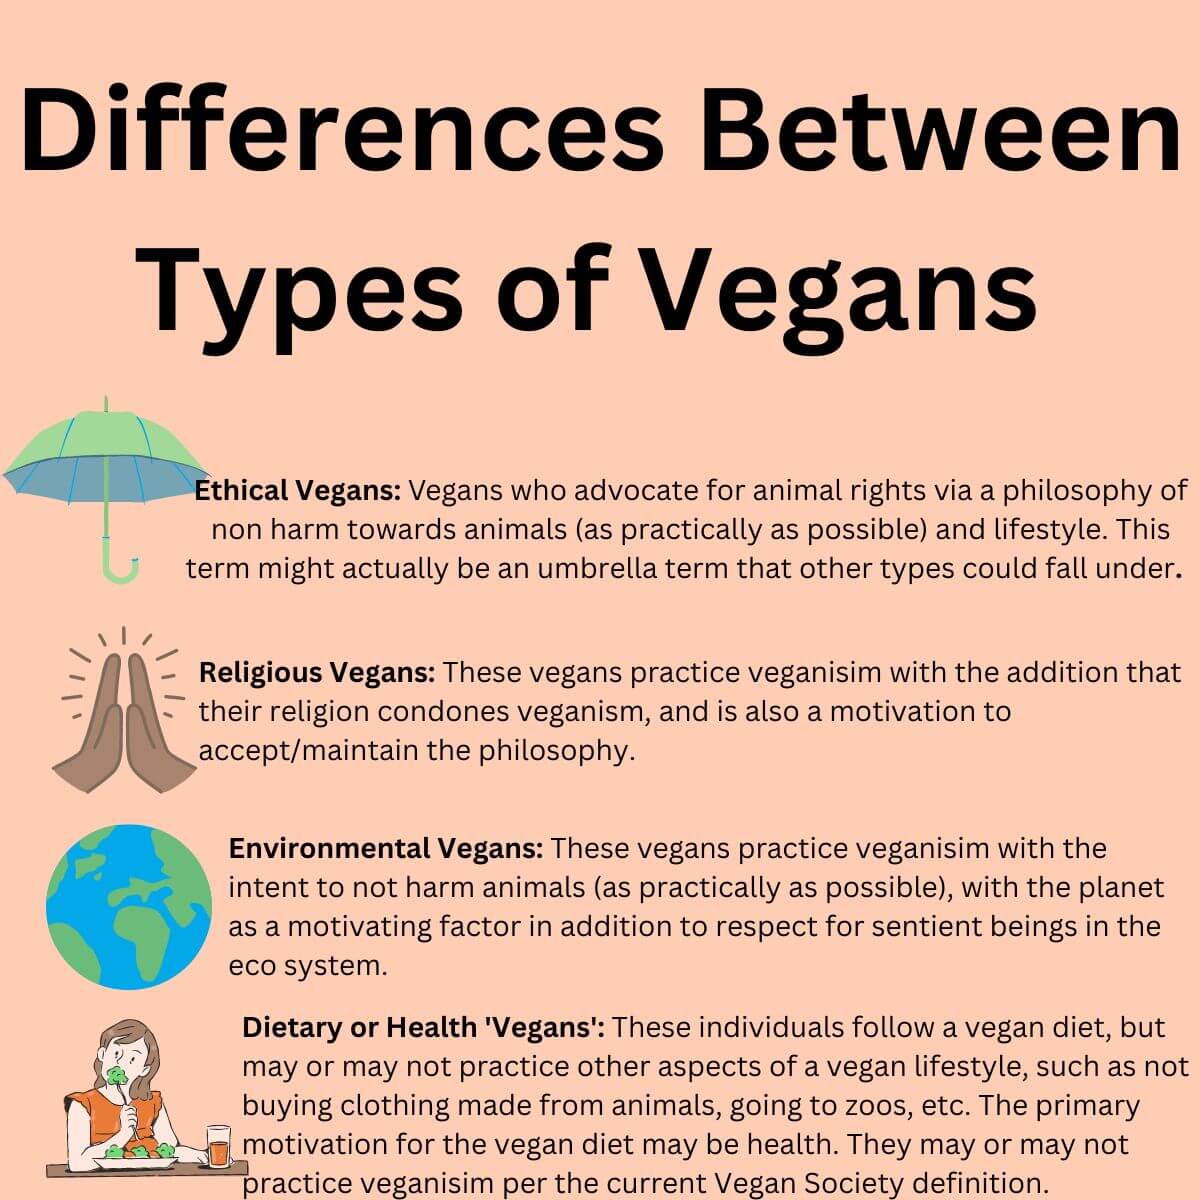 This graphic lists the types of vegans (ethical, religious, environmental and (conditionally) dietary, and differences between them. (this is already explained in the post)